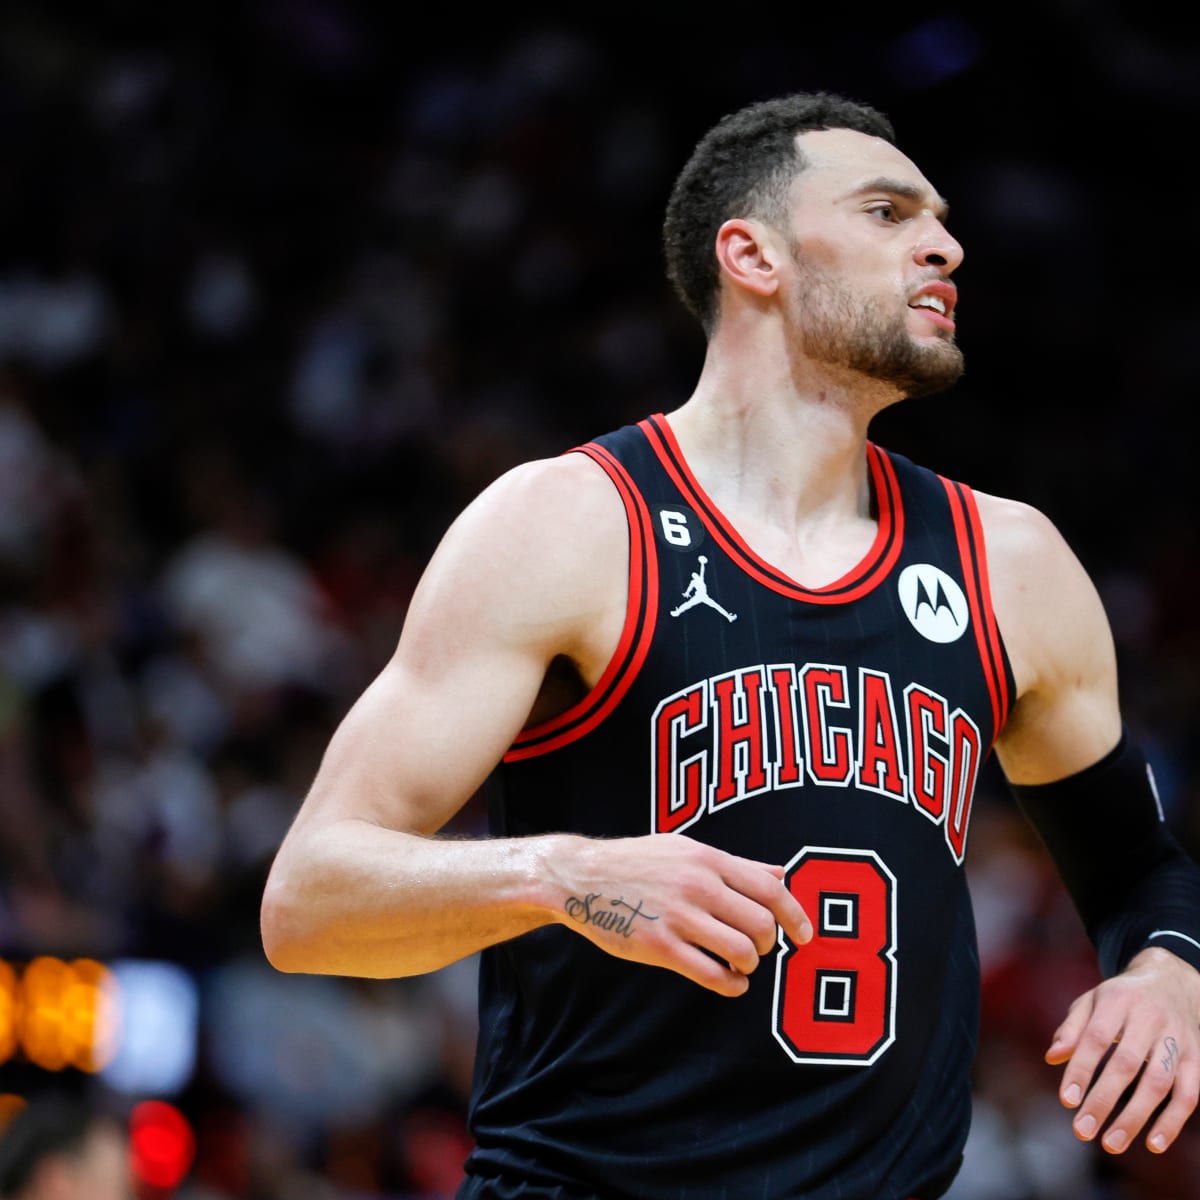 Chicago Bulls land at no. 22 in ESPN's Power Rankings - Sports